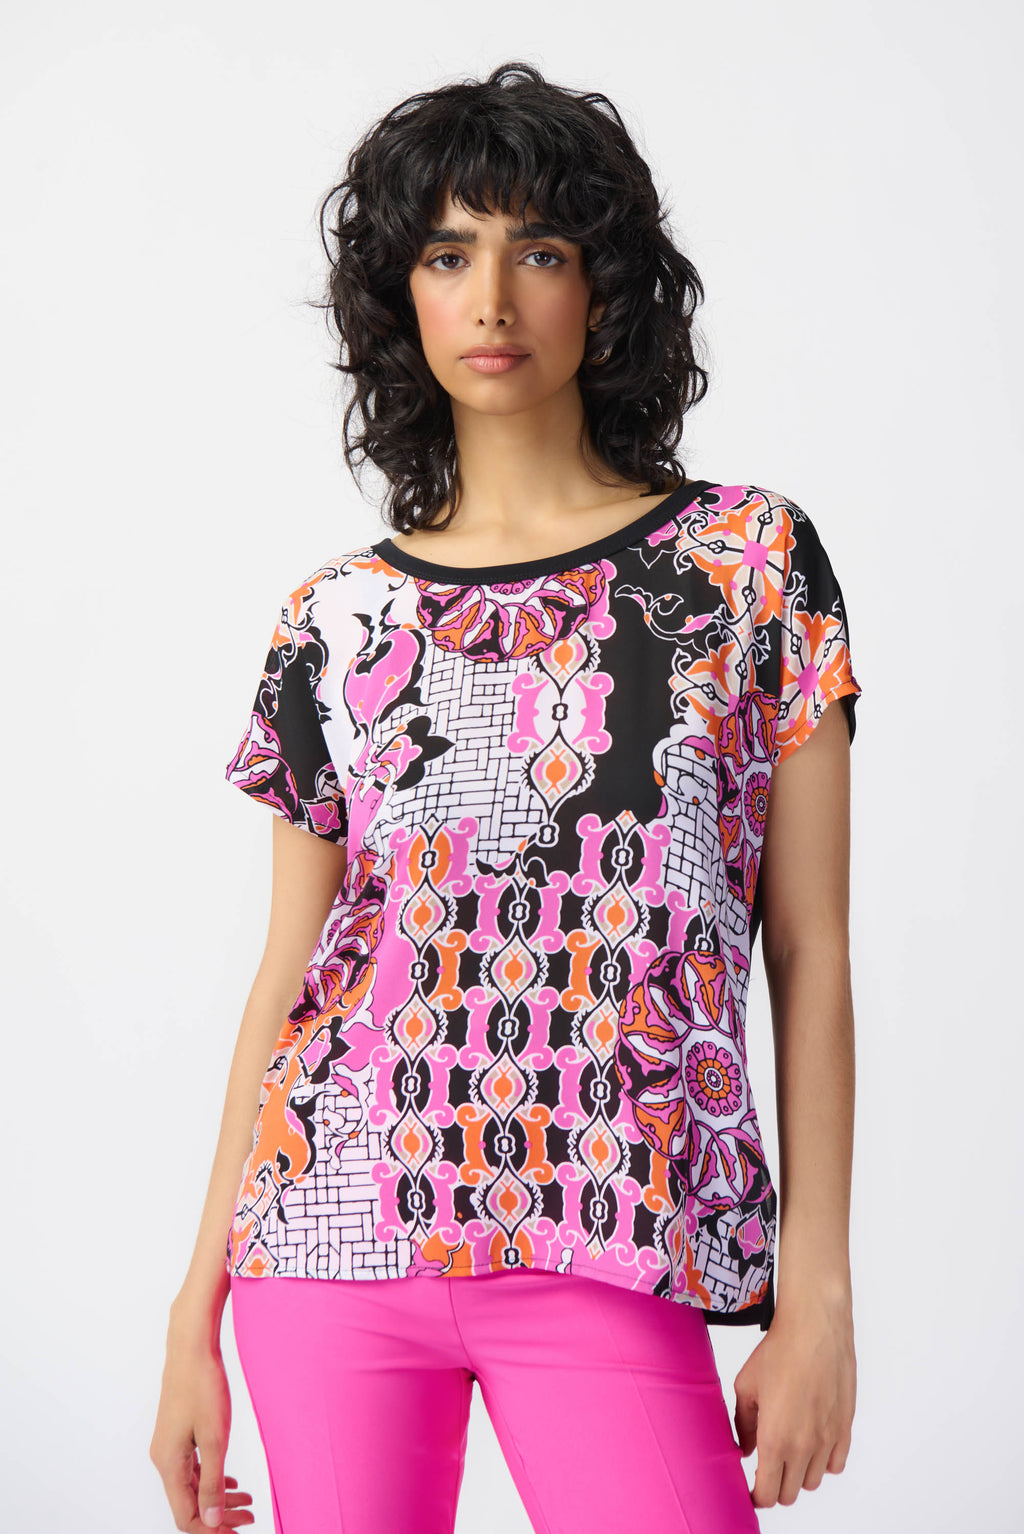 Defined by its vibrant medallion print, this short-sleeved top exudes unmistakable femininity. Crafted from lightweight georgette fabric and complemented by silky knit accents, this top features a scoop neckline and a relaxed, boxy fit.